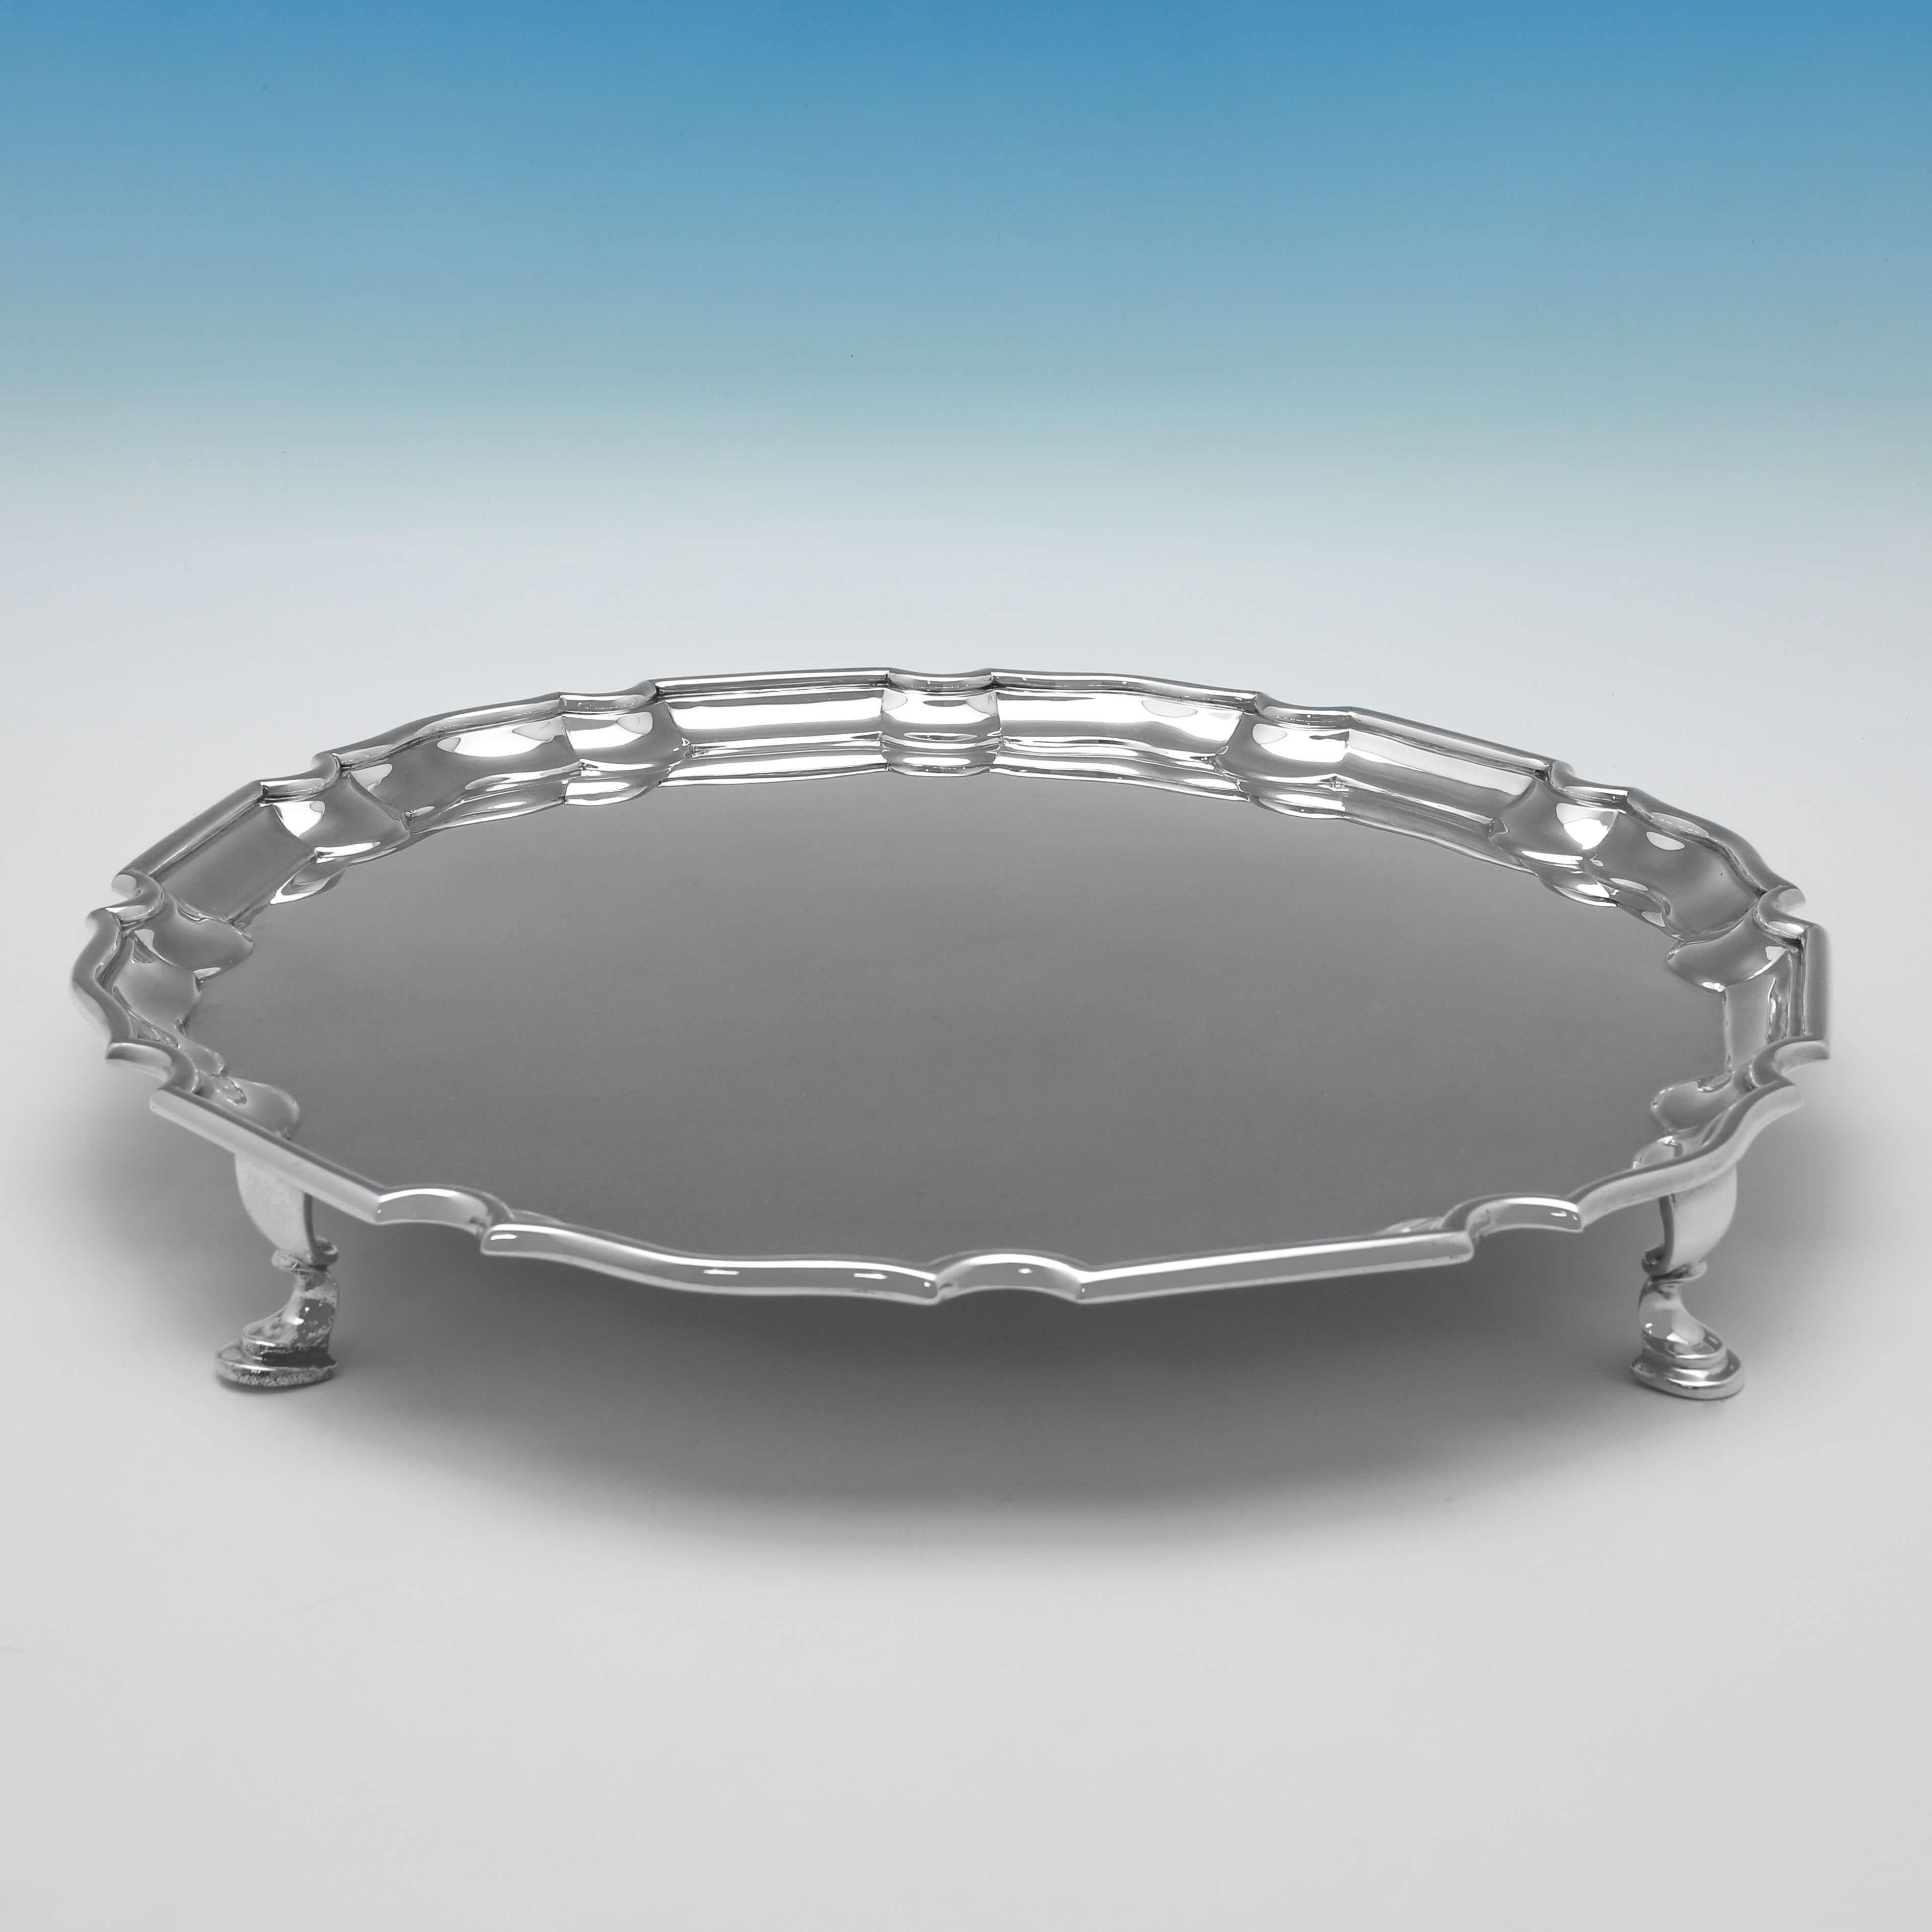 Hallmarked in London in 1899 by D. and J. Wellby, this handsome, Victorian, Antique Sterling Silver Salver, stands on 4 hoof feet, and features a 'Chippendale' border. 

The salver measures 1.75